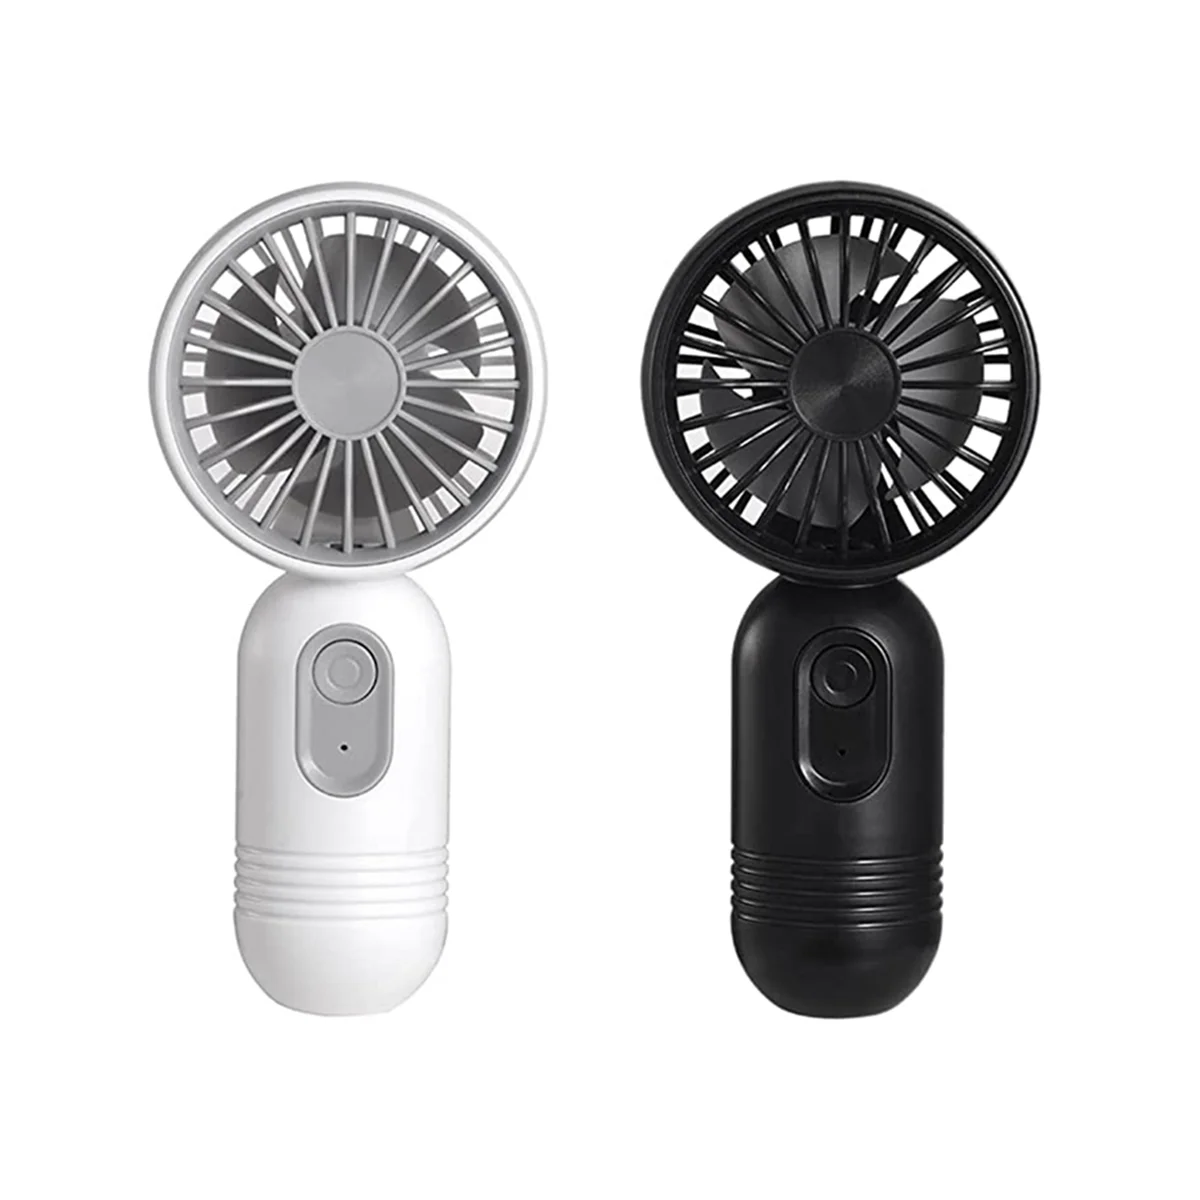 

Portable Handheld Mini Fans, USB Rechargeable Personal Fan for Travel/Camping/Outdoor/Home/Office 2PCS